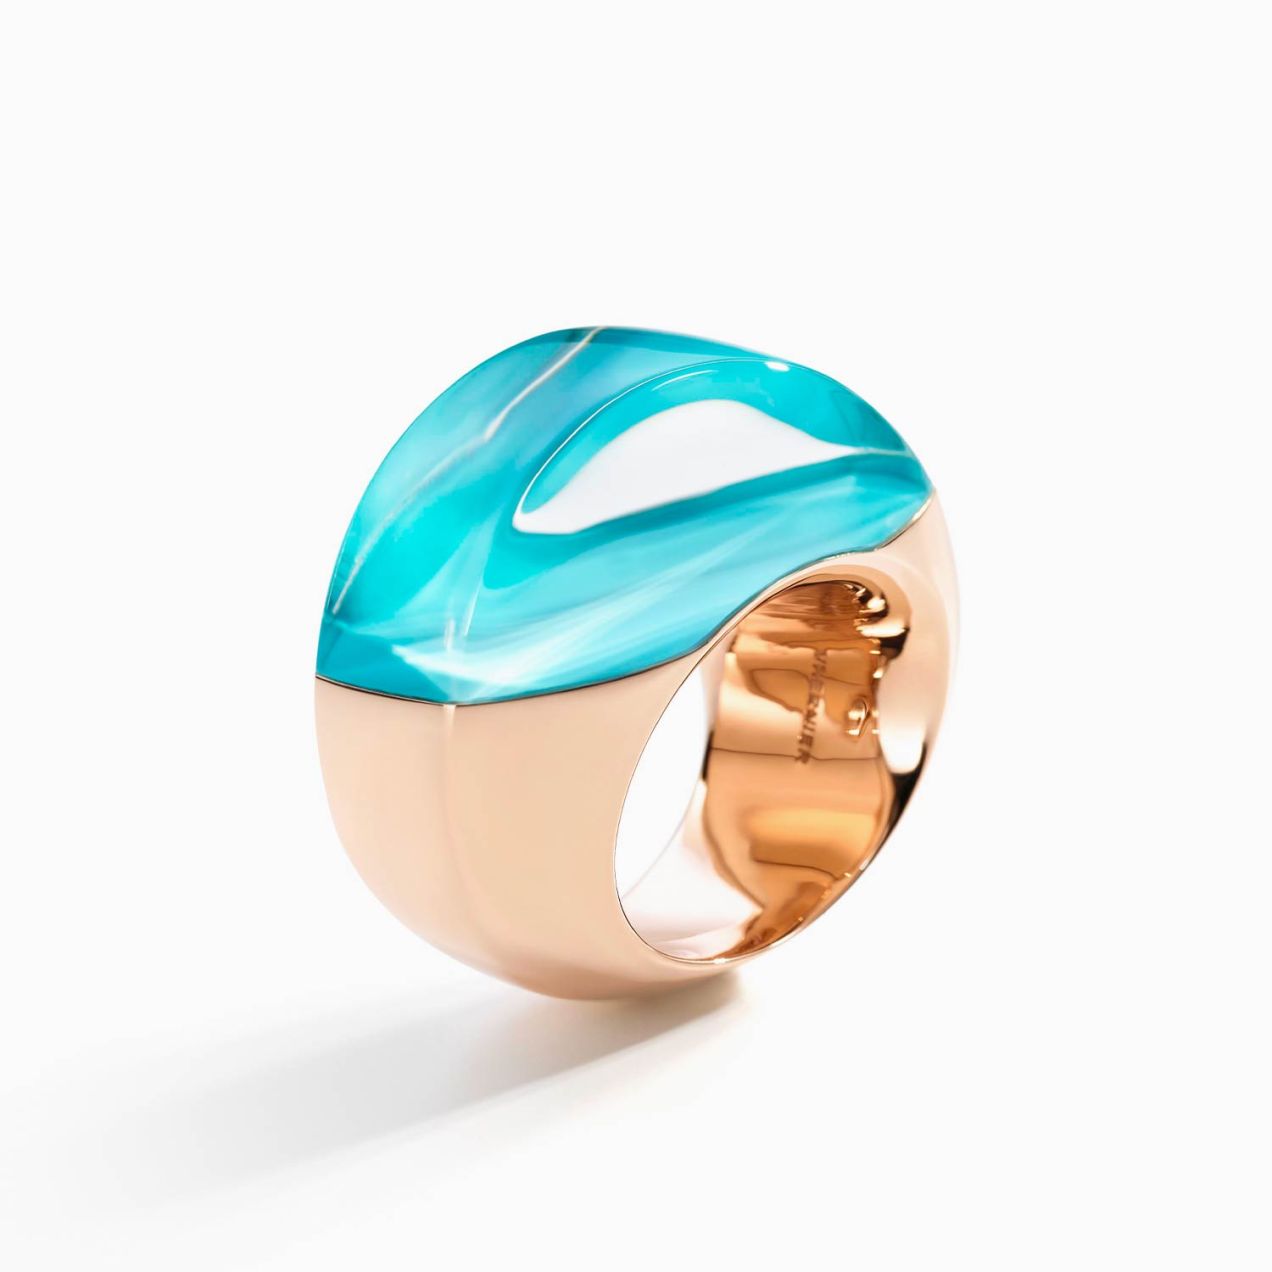 Vhernier aladdin ring in rose gold with turquoise quartz crystal